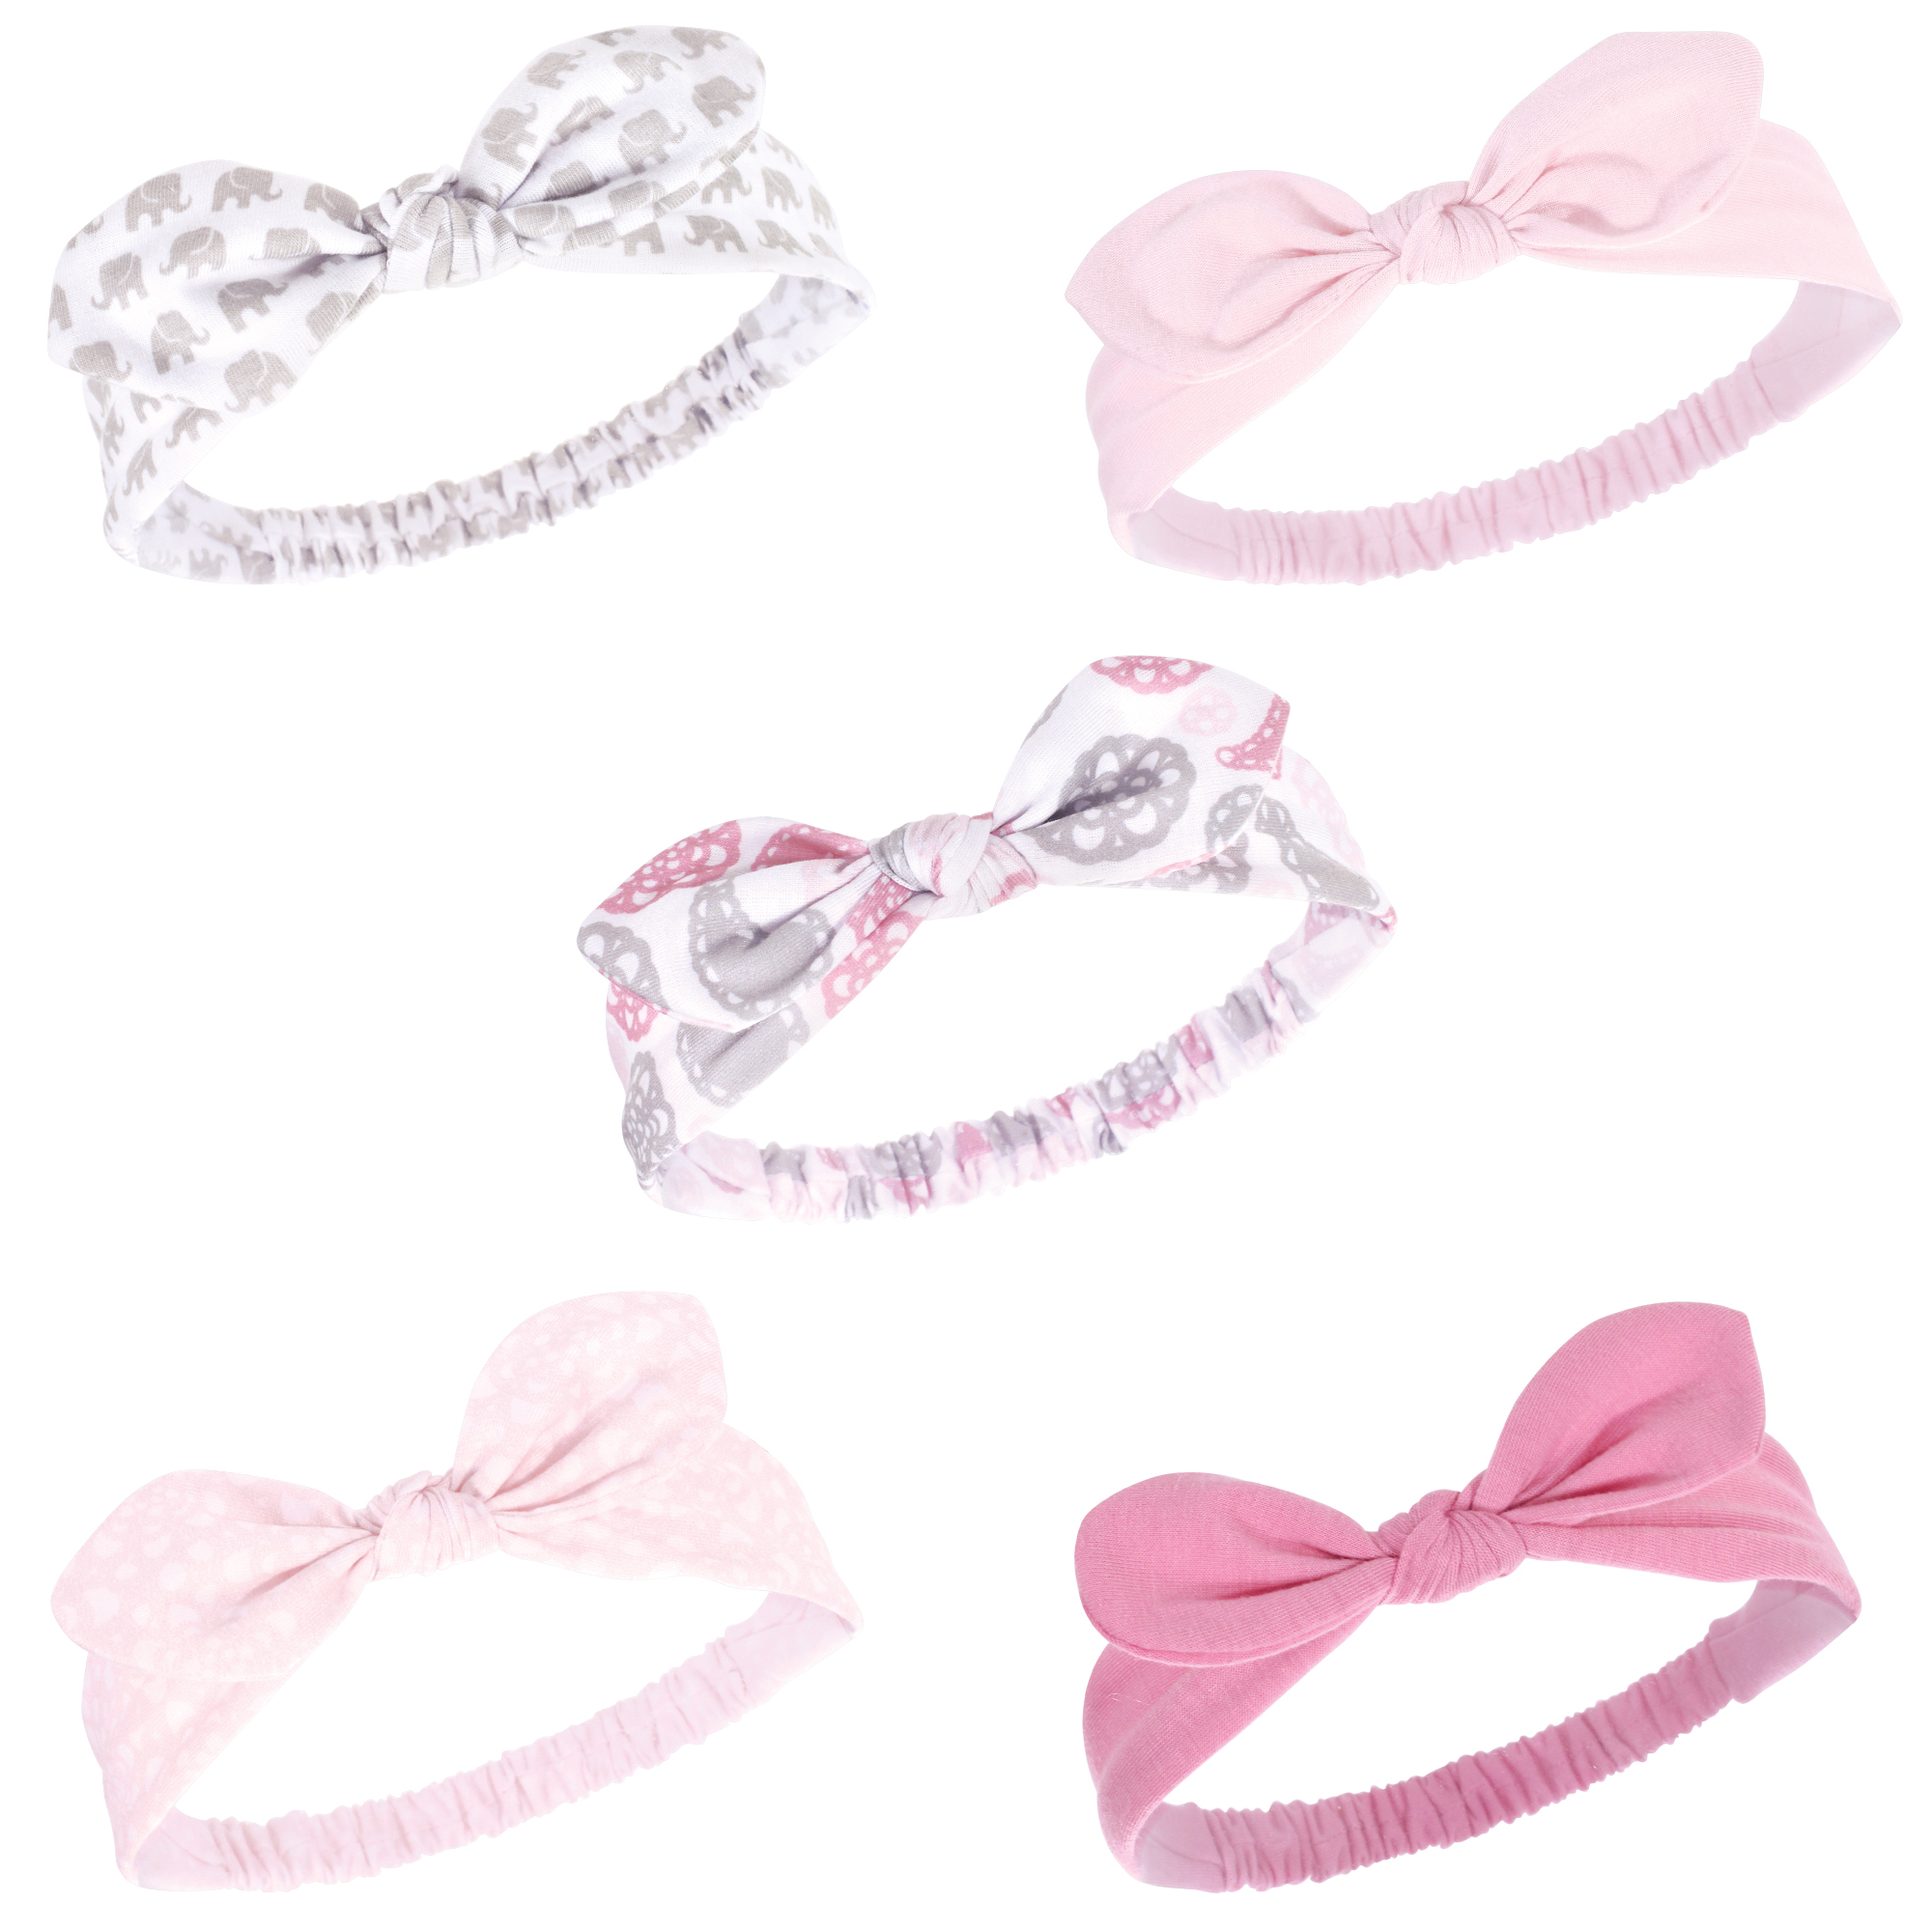 Hudson Baby Knotted Jersey Headbands, 5-Pack, Paisley Medallion ...